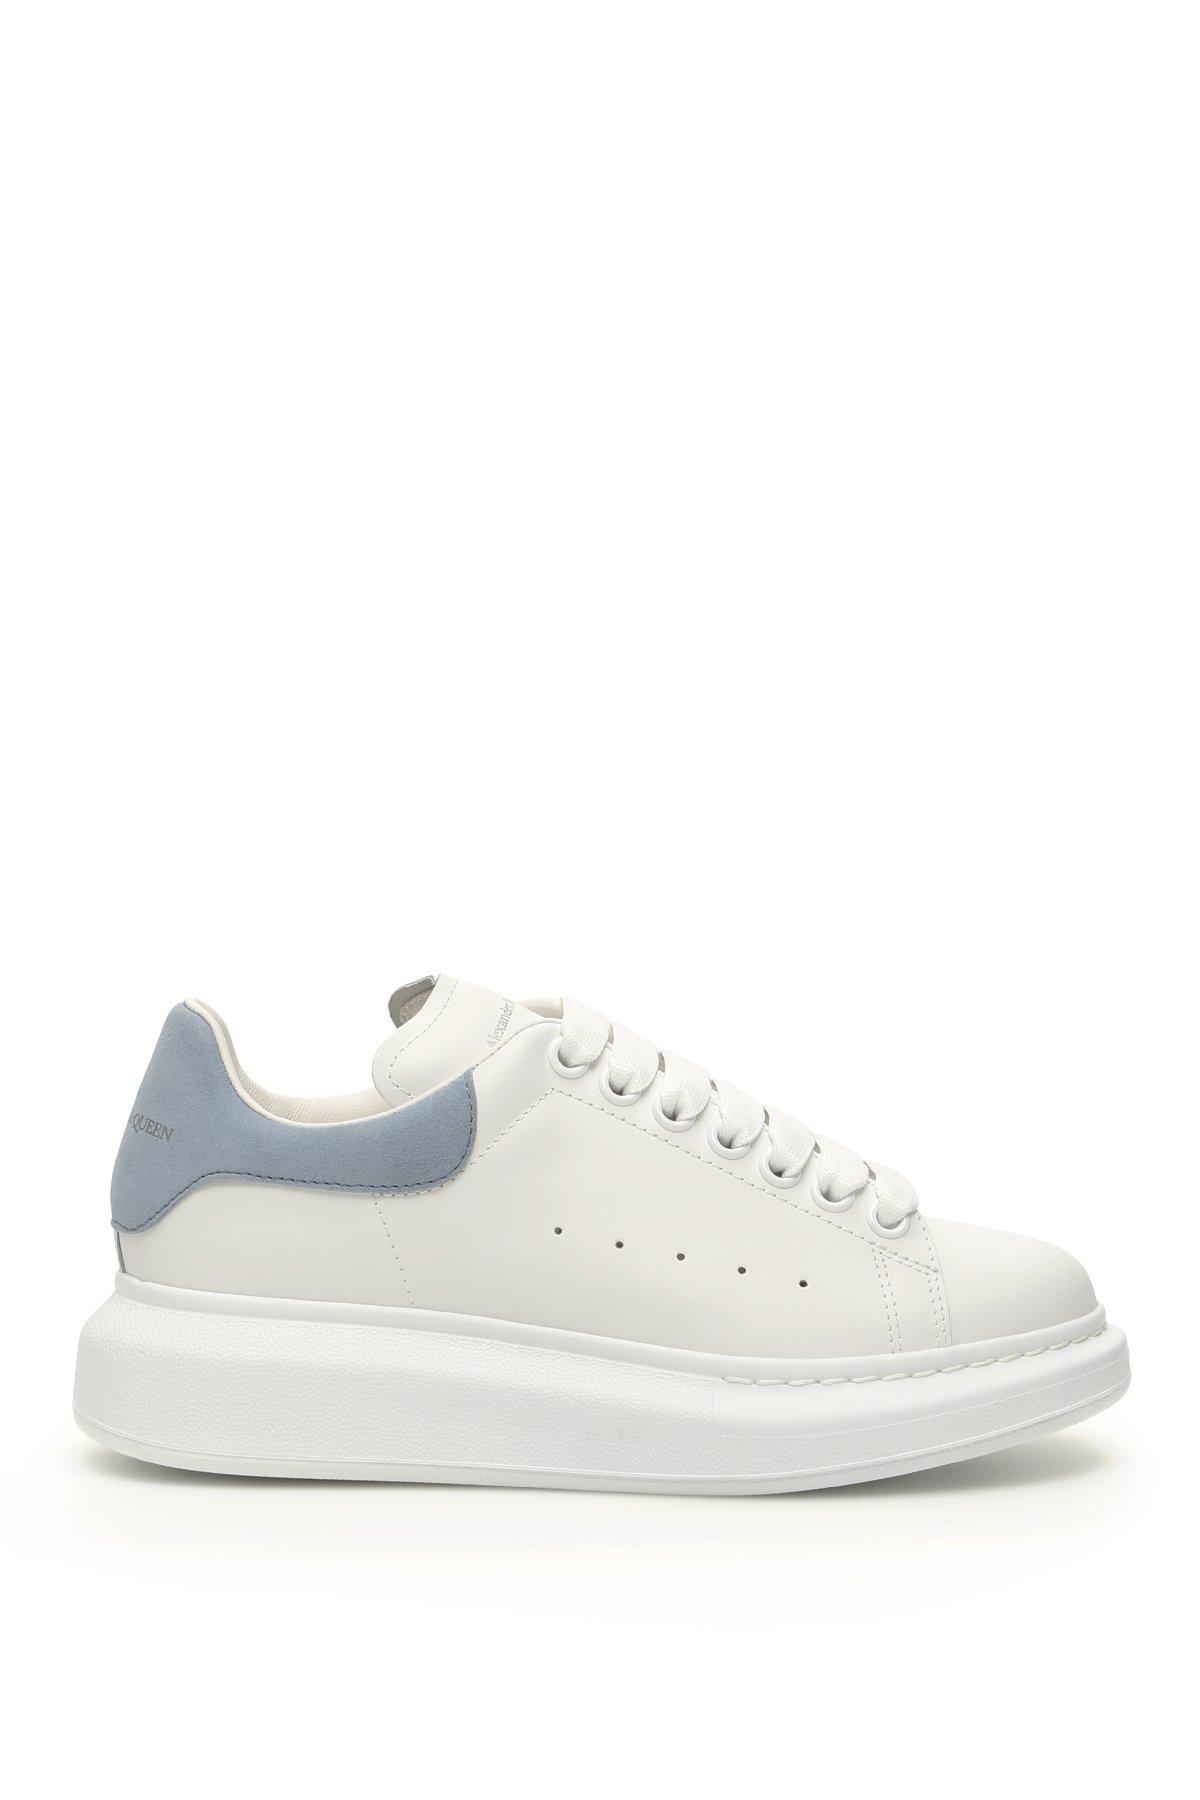 Alexander McQueen Leather Oversized Sneakers in White - Lyst